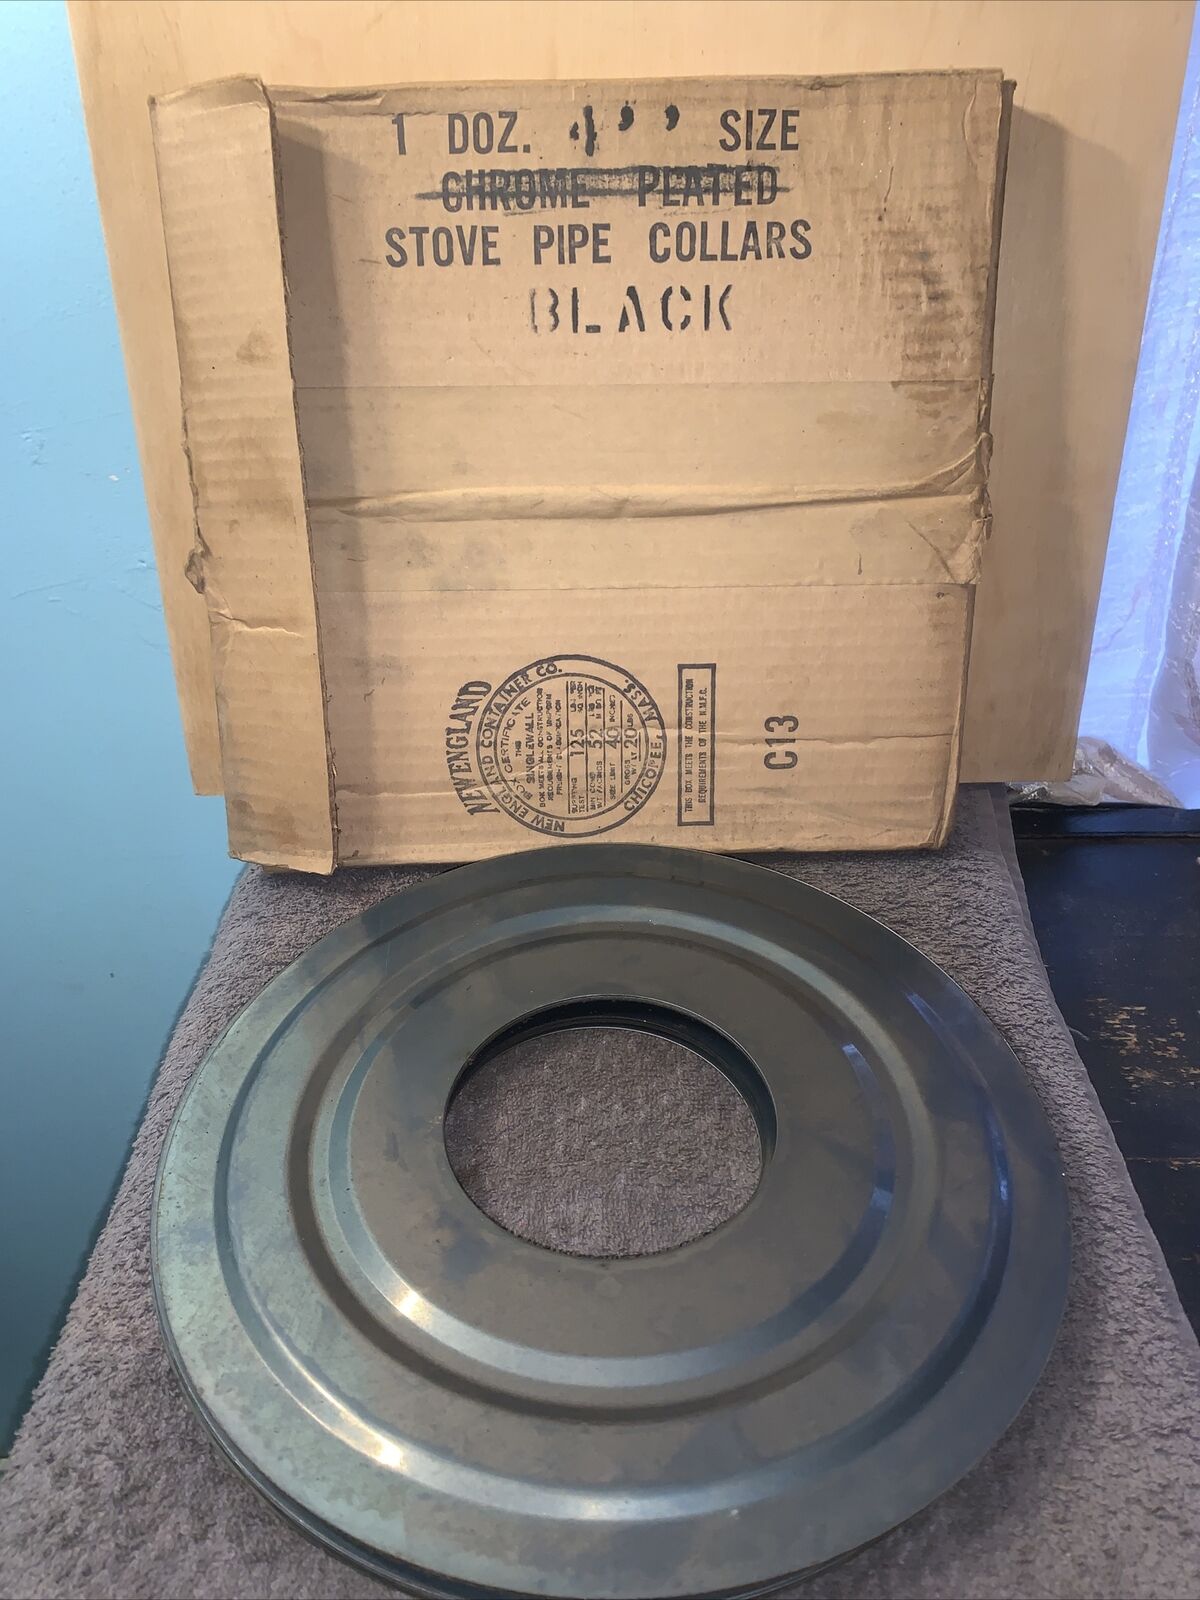 12 Stove Pipe Collars 4 Inch Black New Old Stock￼